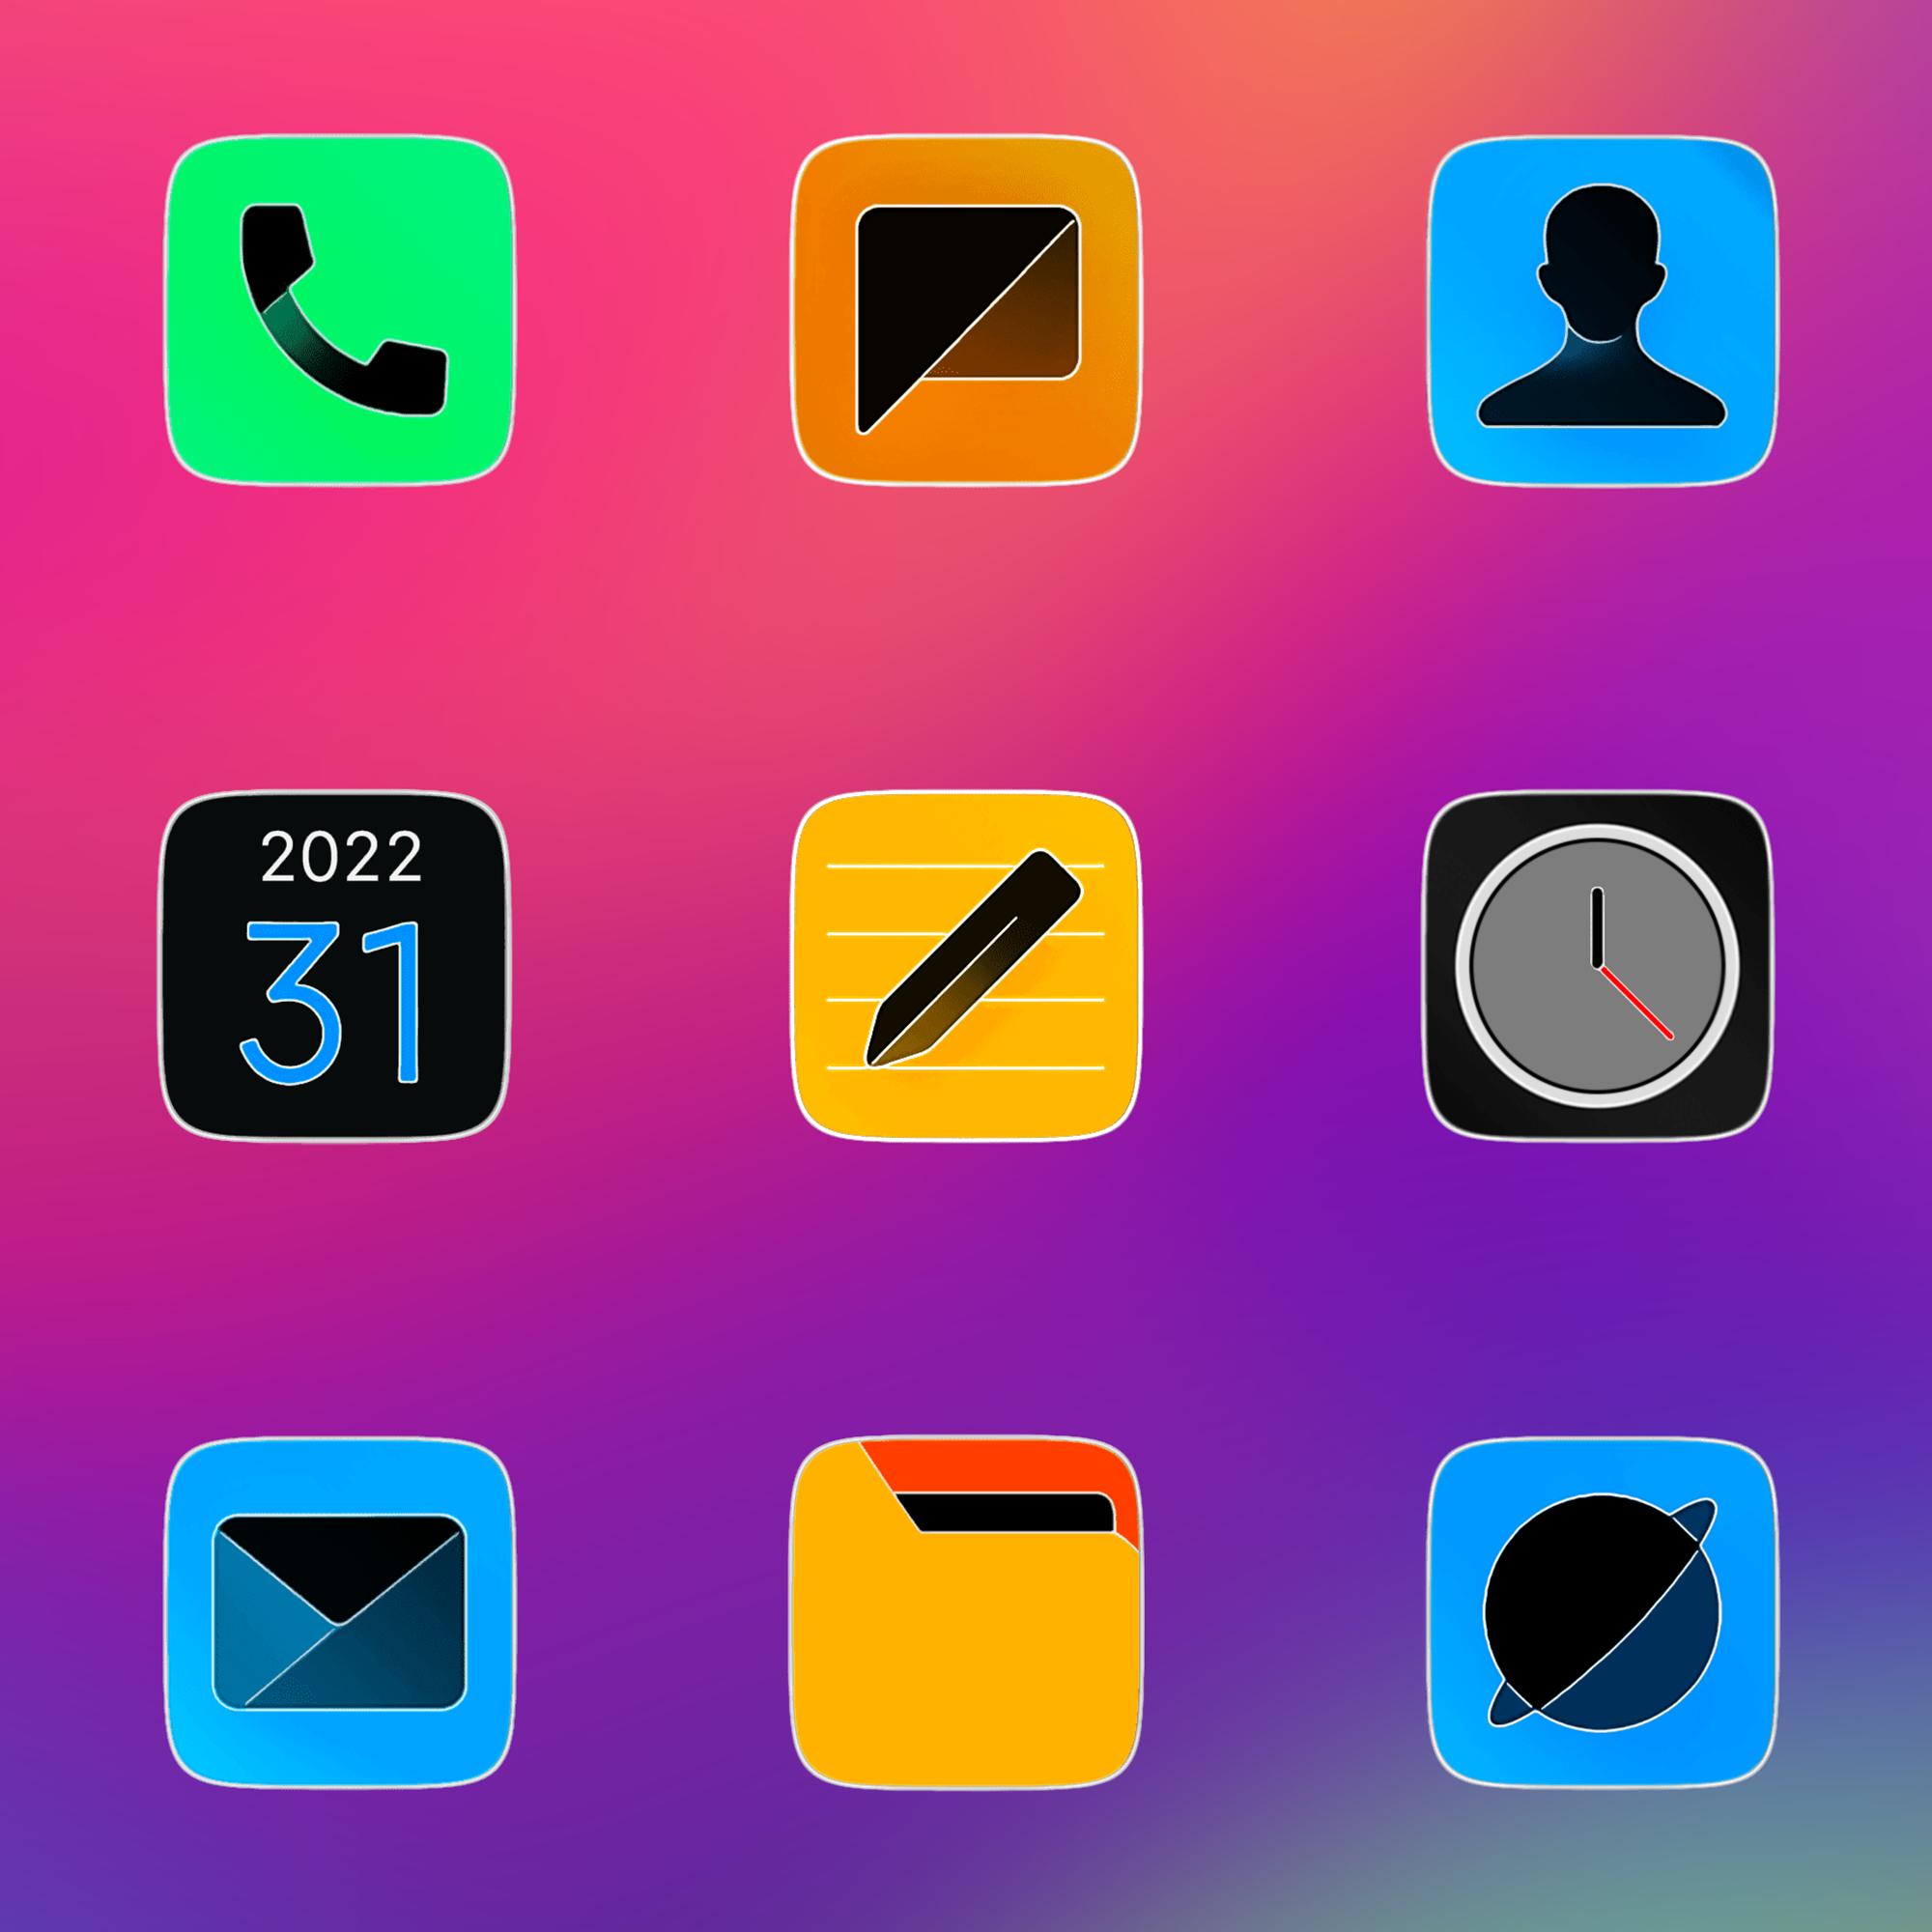 Miui icon pack. MIUI 13 icon Pack. One UI 5 icons.